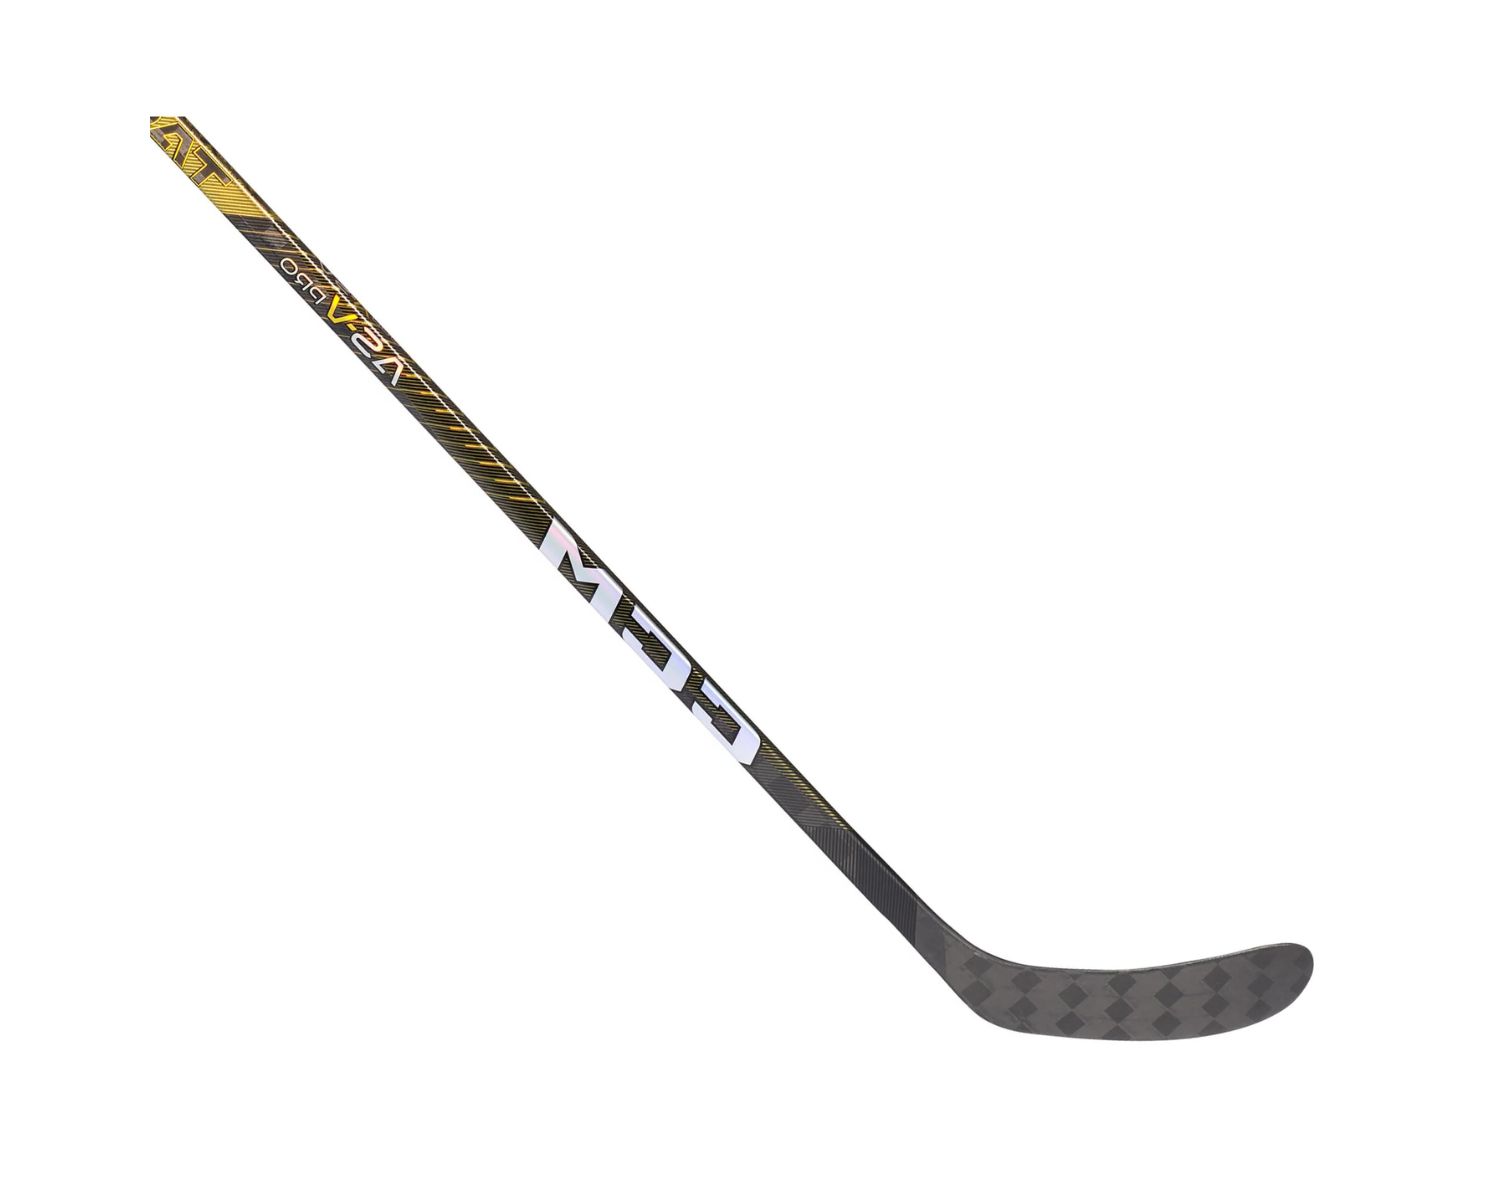 Hockey Stick Review: Unbiased Analysis and Ratings